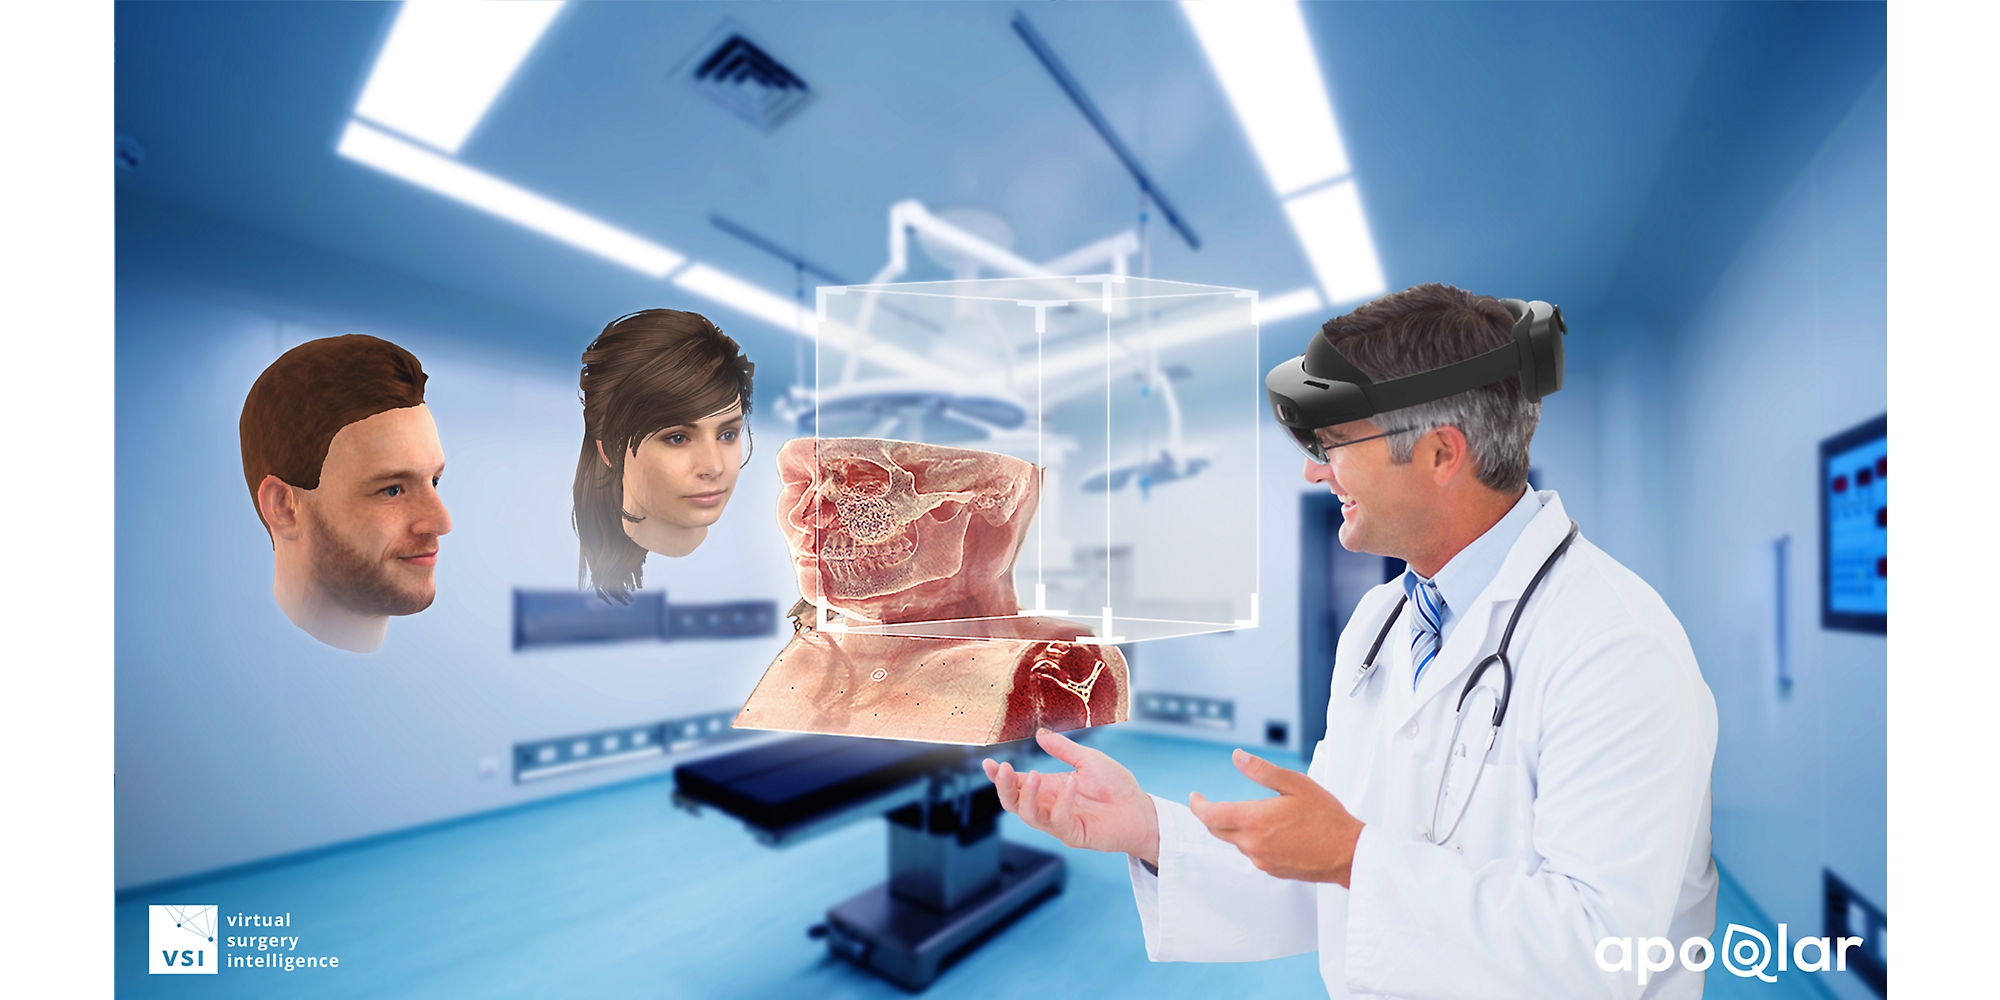 A doctor using a HoloLens 2 device to view a medical diagram and speak with two other people in mixed reality.